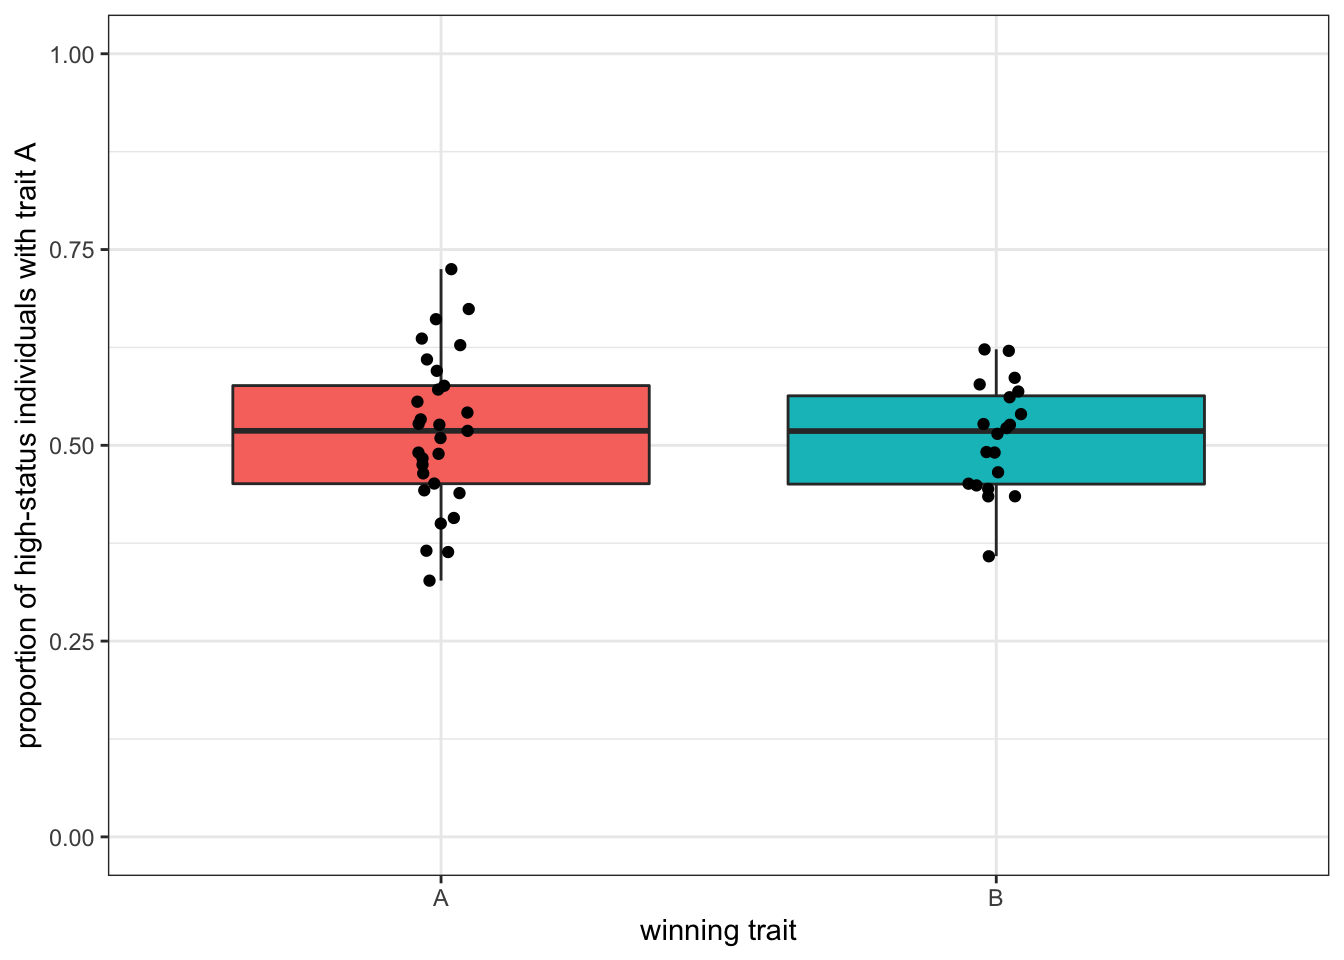 With bigger populations - and bigger pools of high-status demonstrators is more difficult to predict the winning trait.